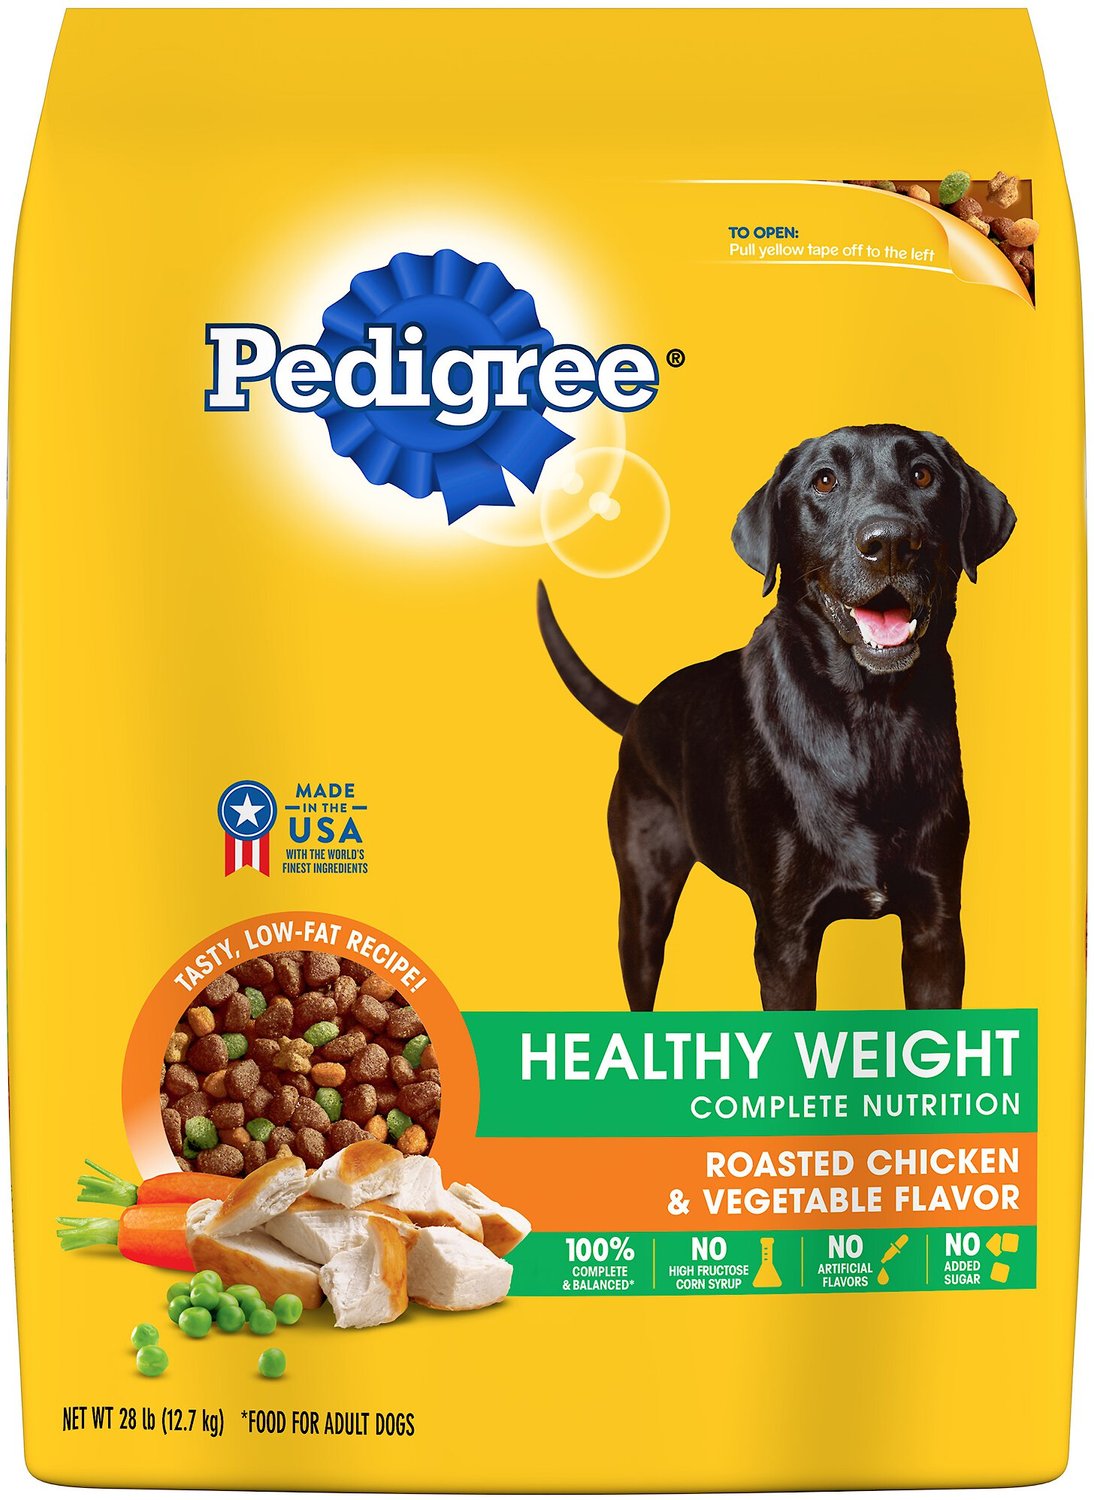 PEDIGREE Healthy Weight Complete Nutrition Roasted Chicken